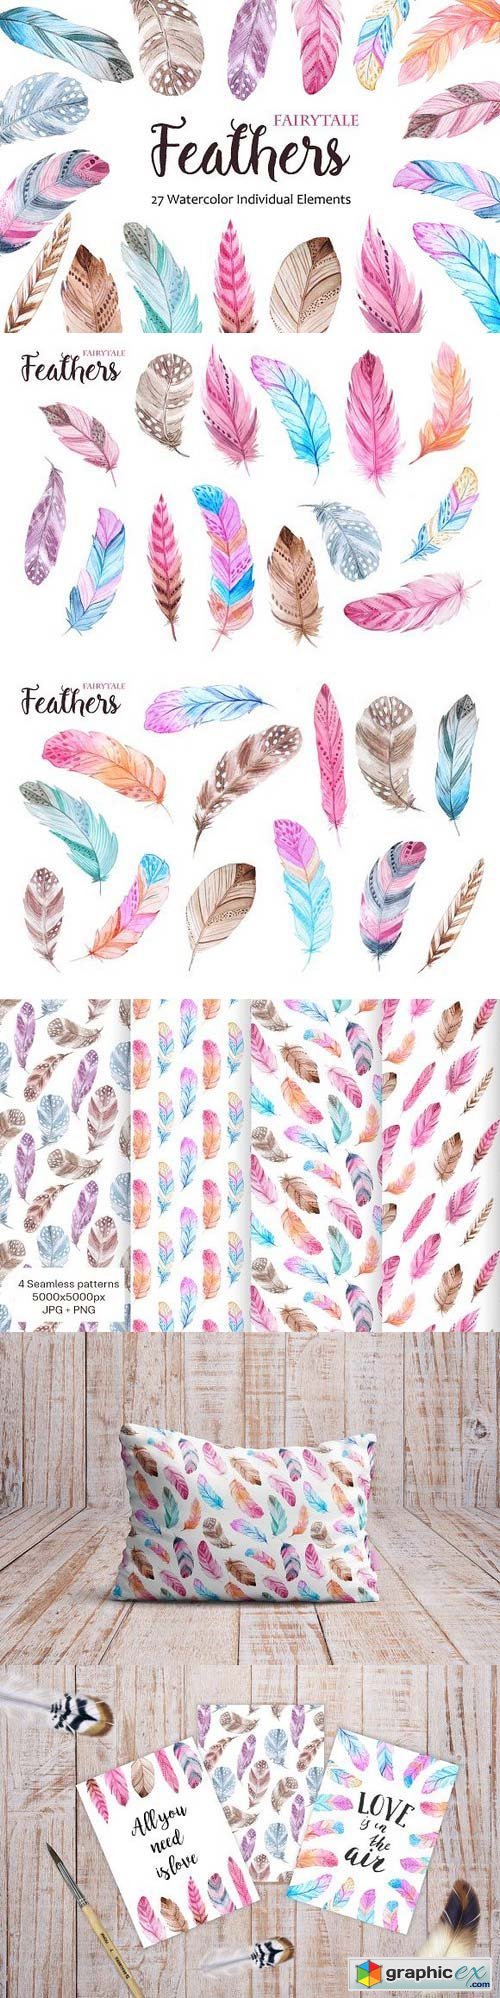 Watercolor Fairytale Feathers Set